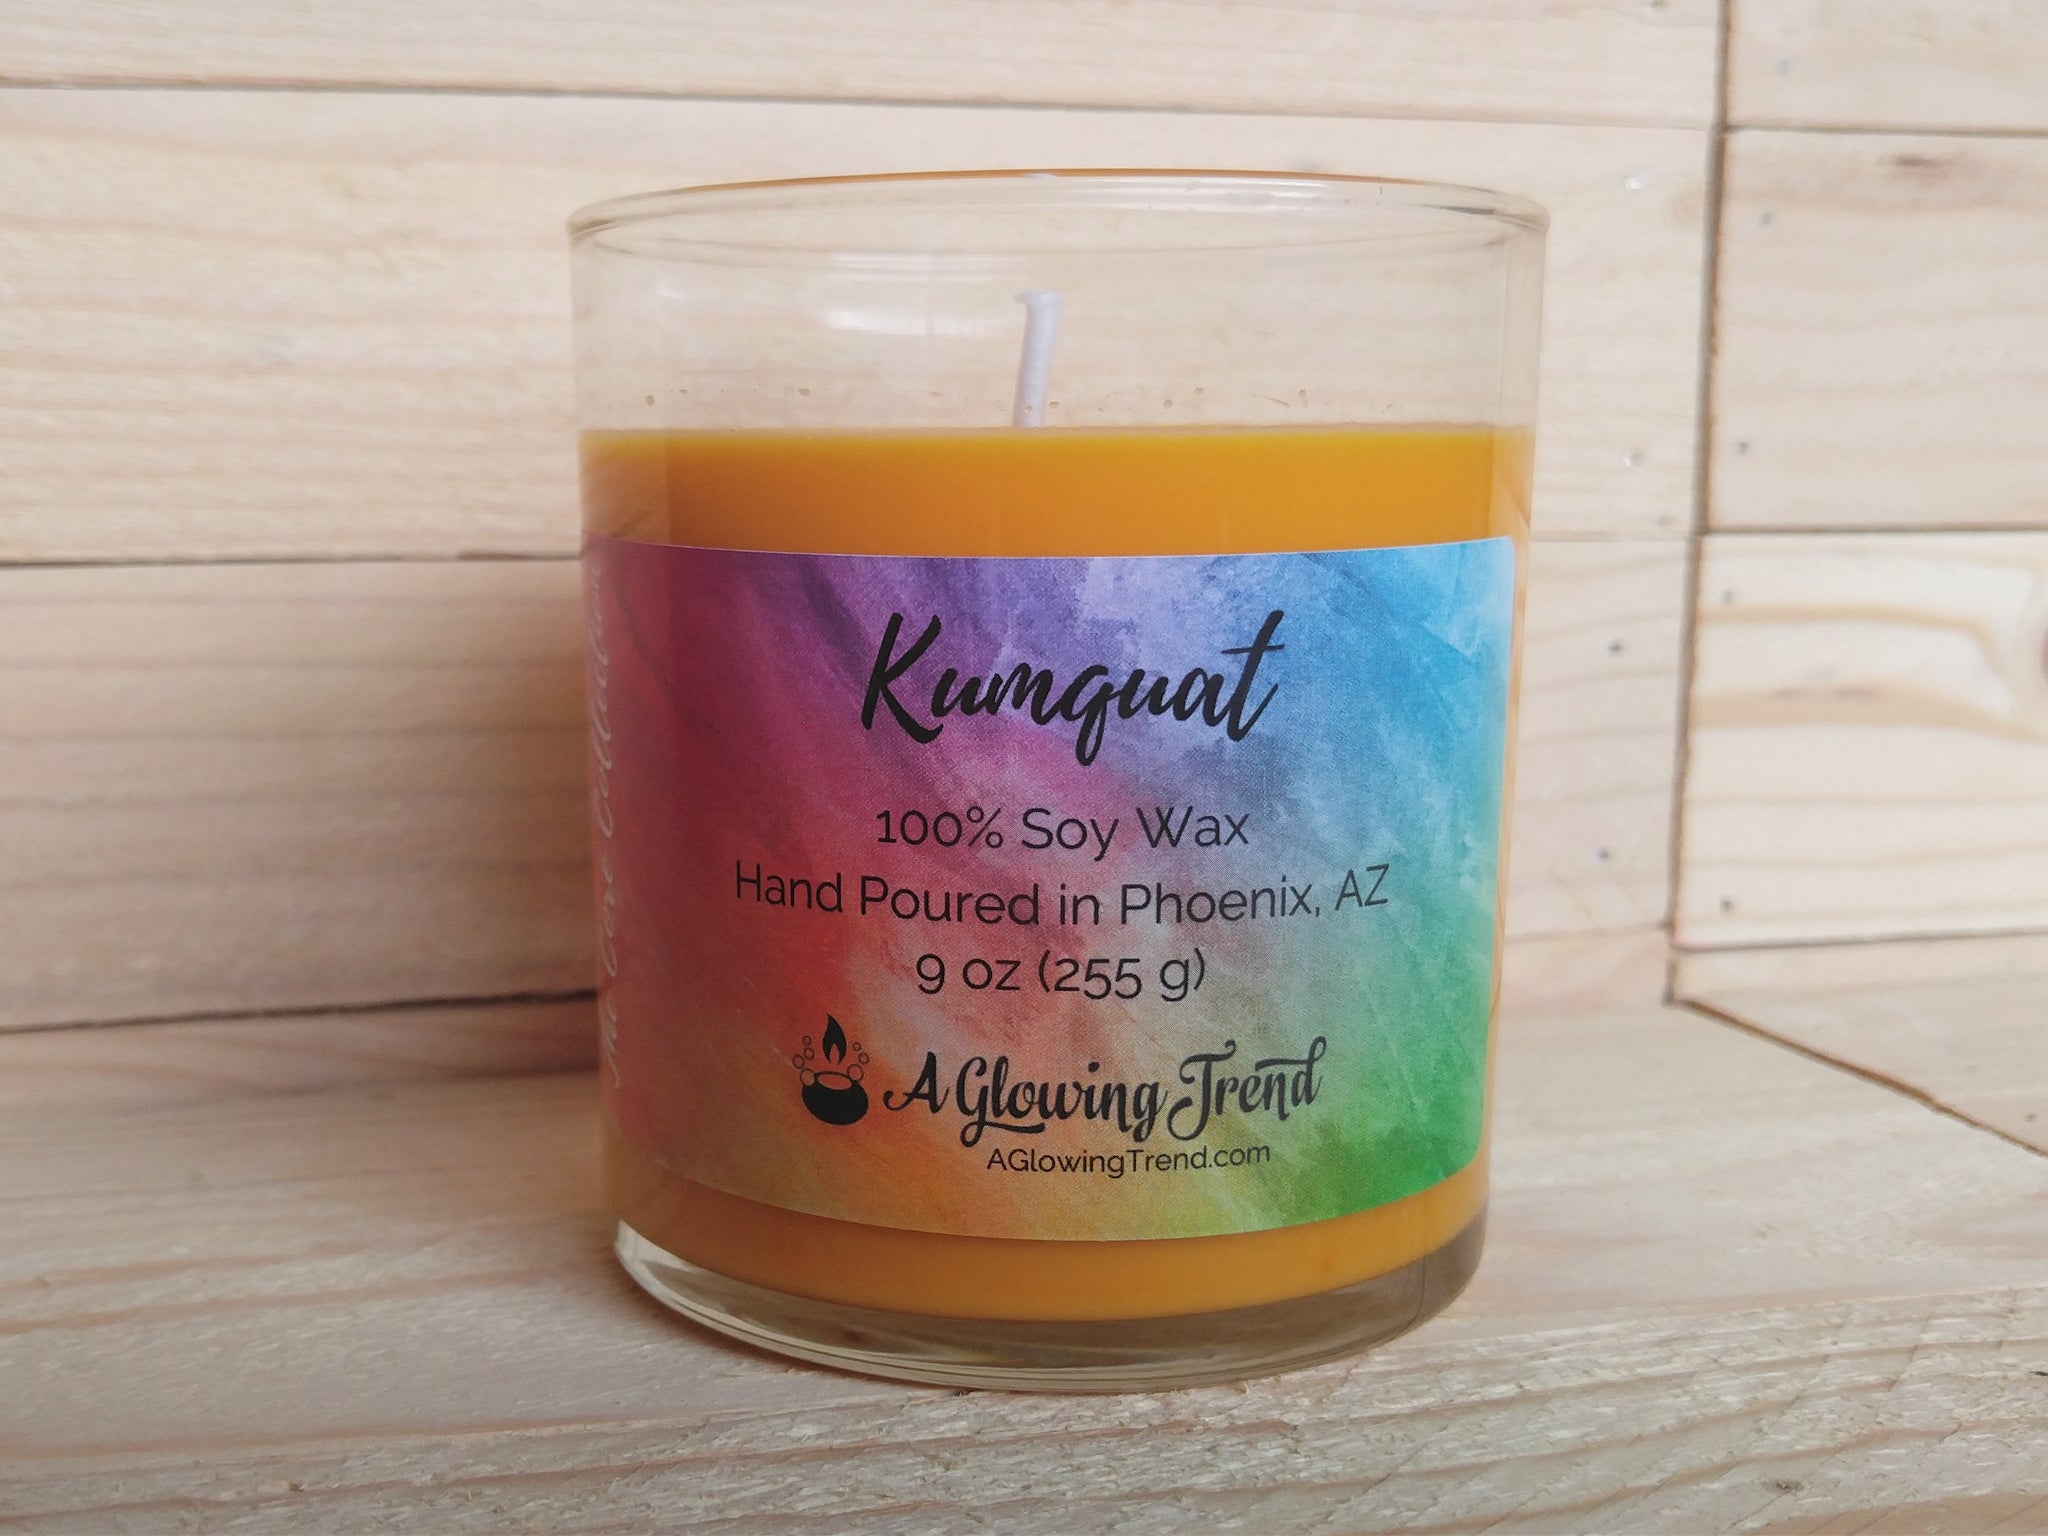 A 9 oz glass tumbler containing a yellow-orange Kumquat scented soy candle by A Glowing Trend